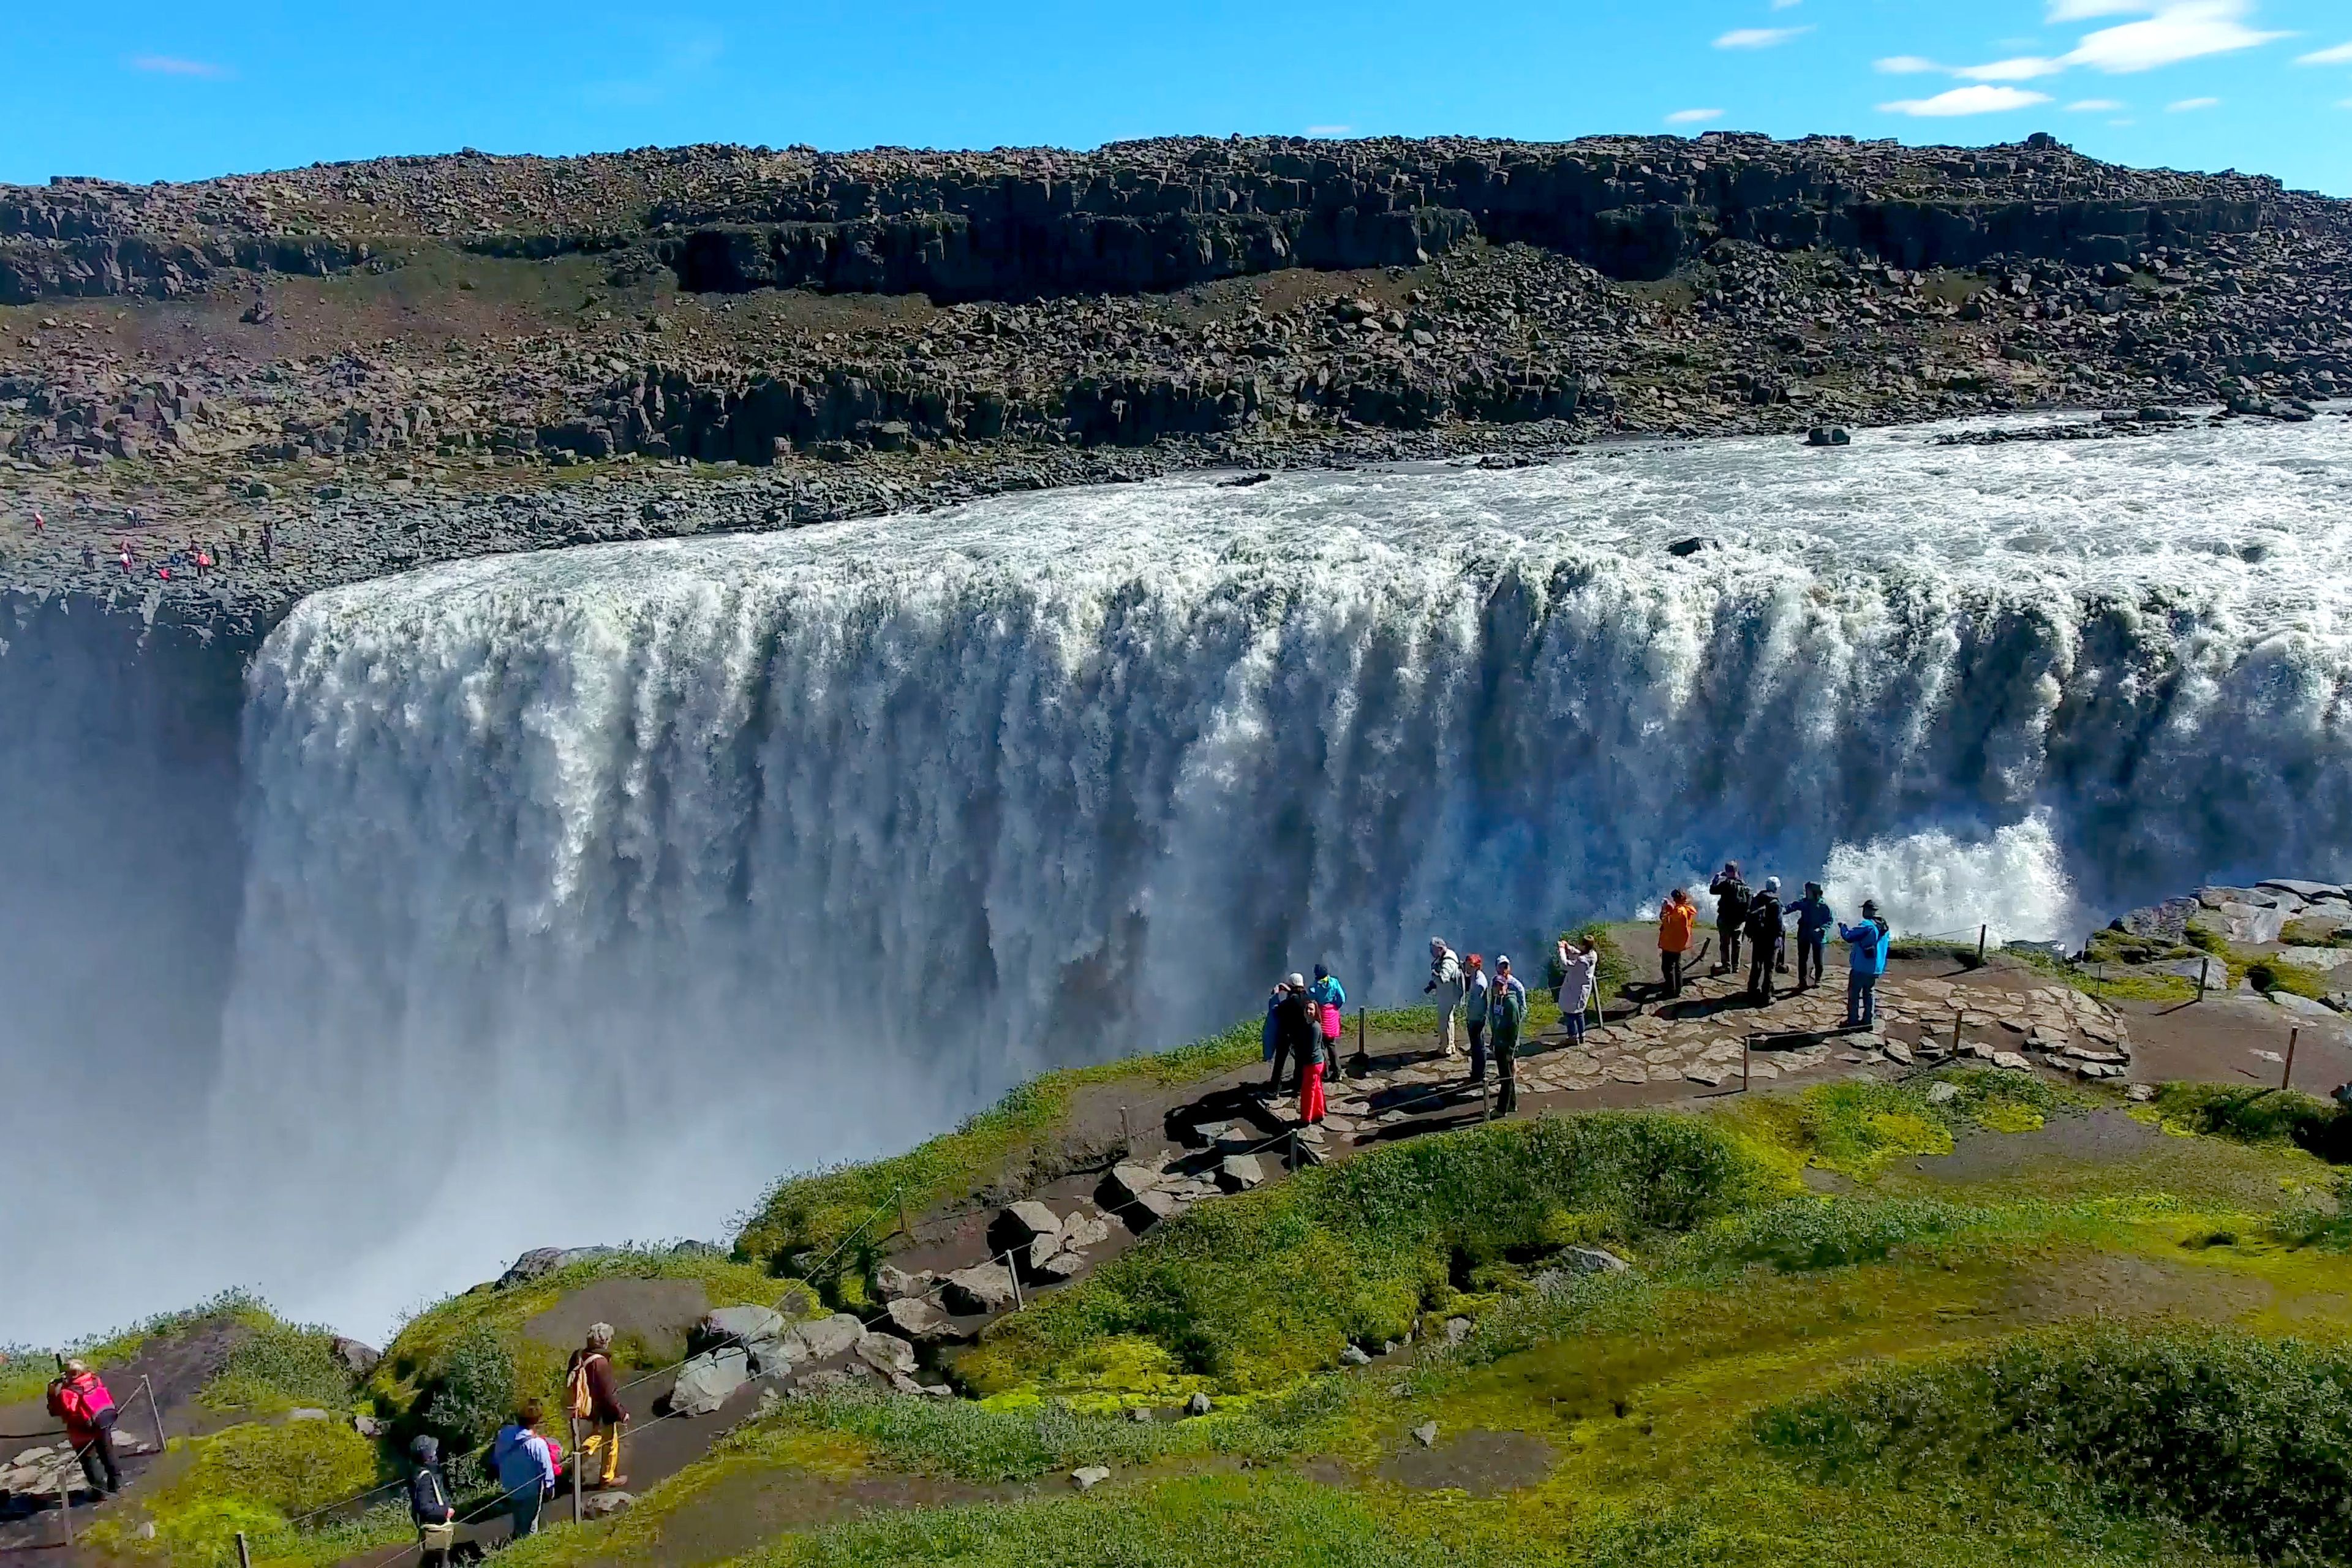 Several people came to see the magnificent Dettifoss waterfall